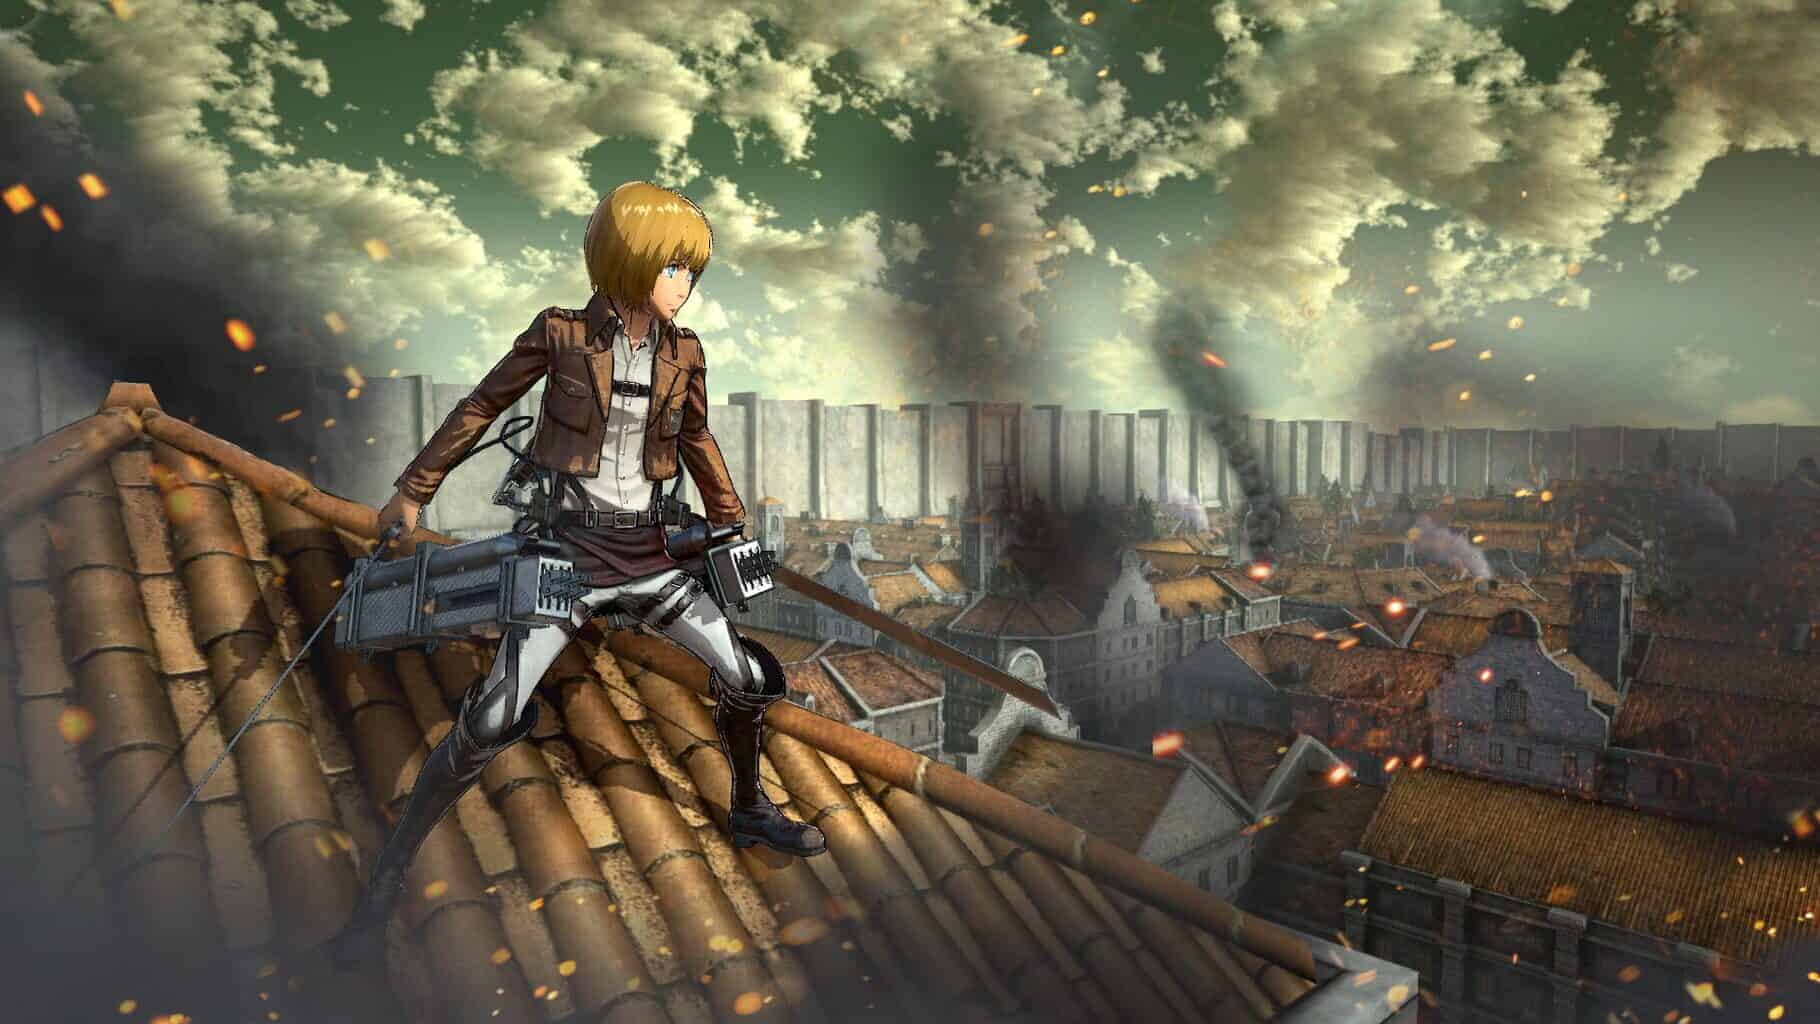 Screenshot of character from Attack On Titan